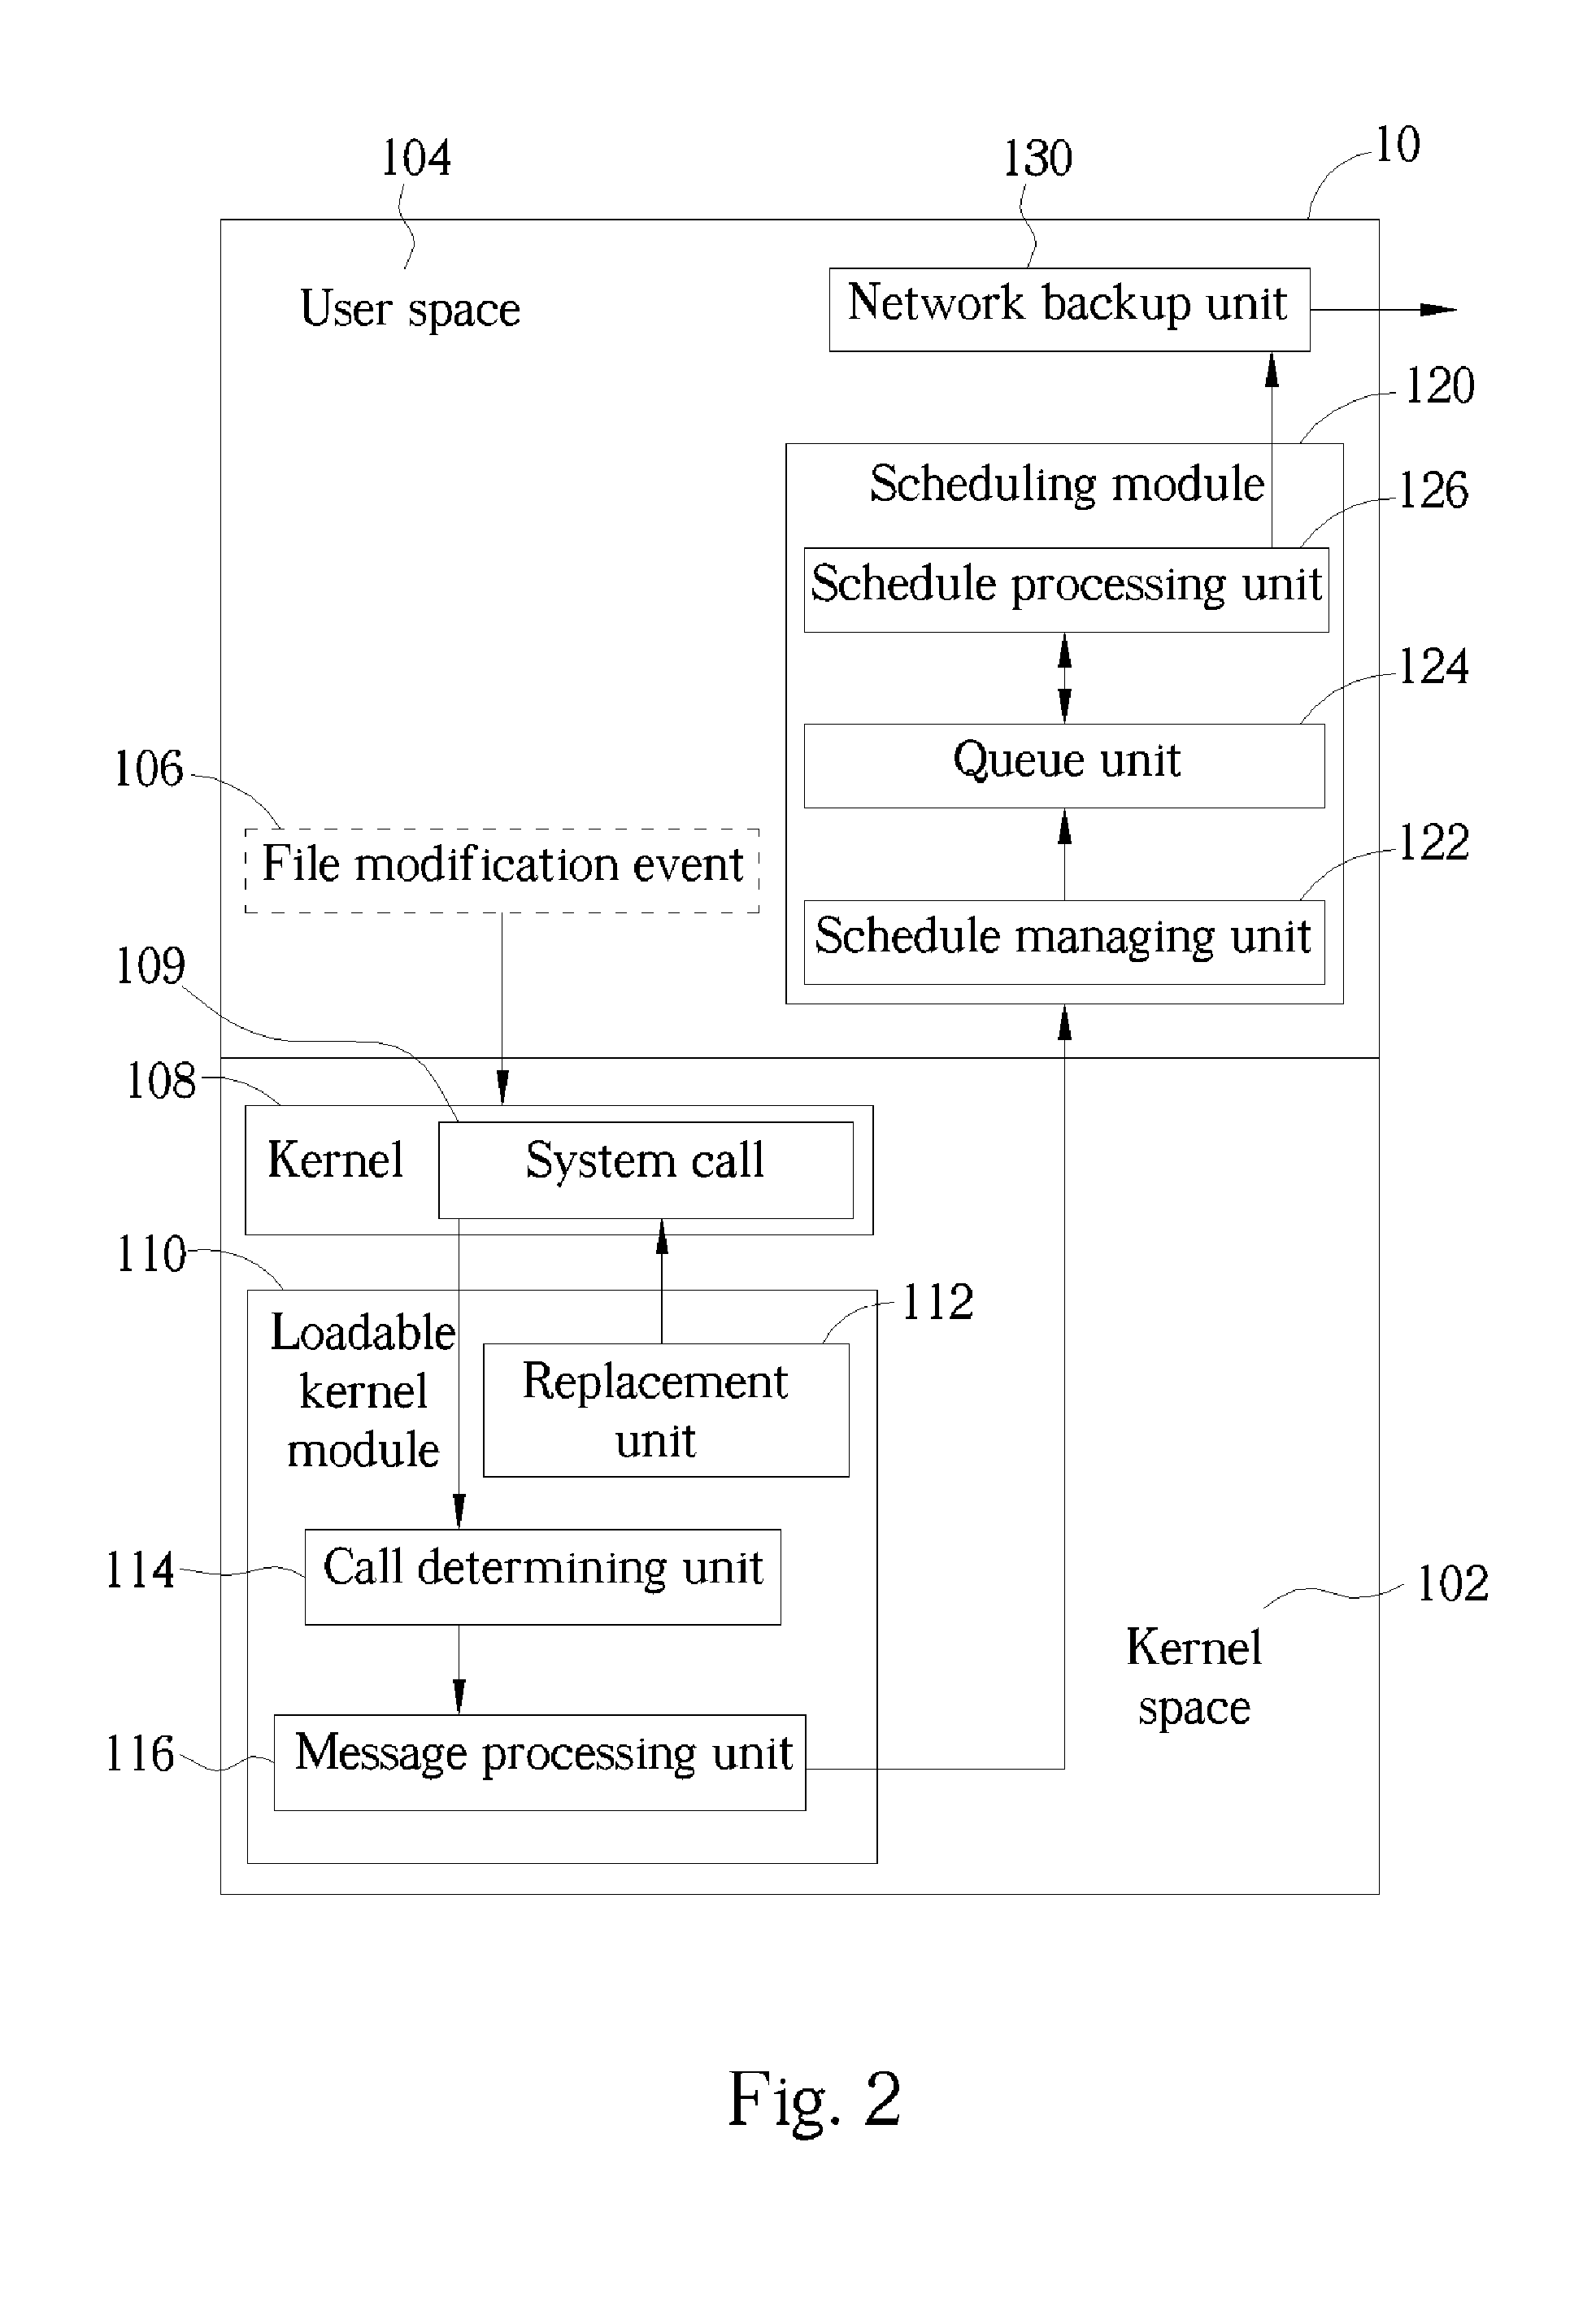 Real-time remote backup system and related method